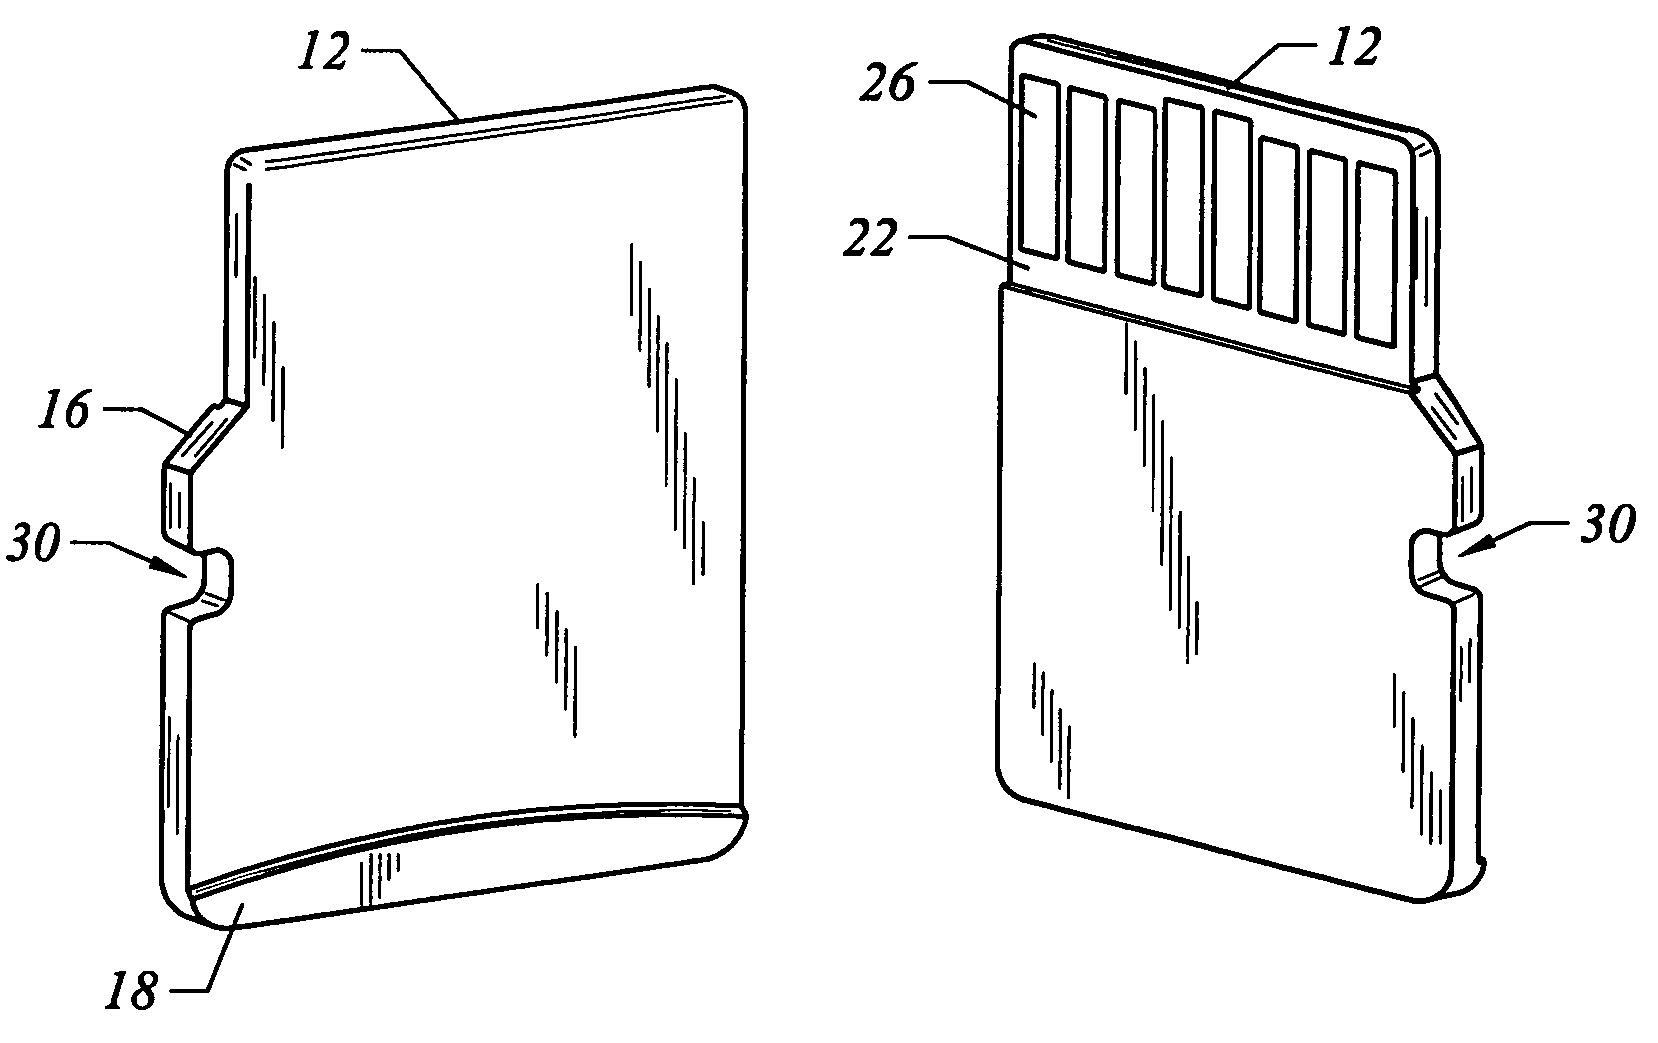 Memory card with raised portion